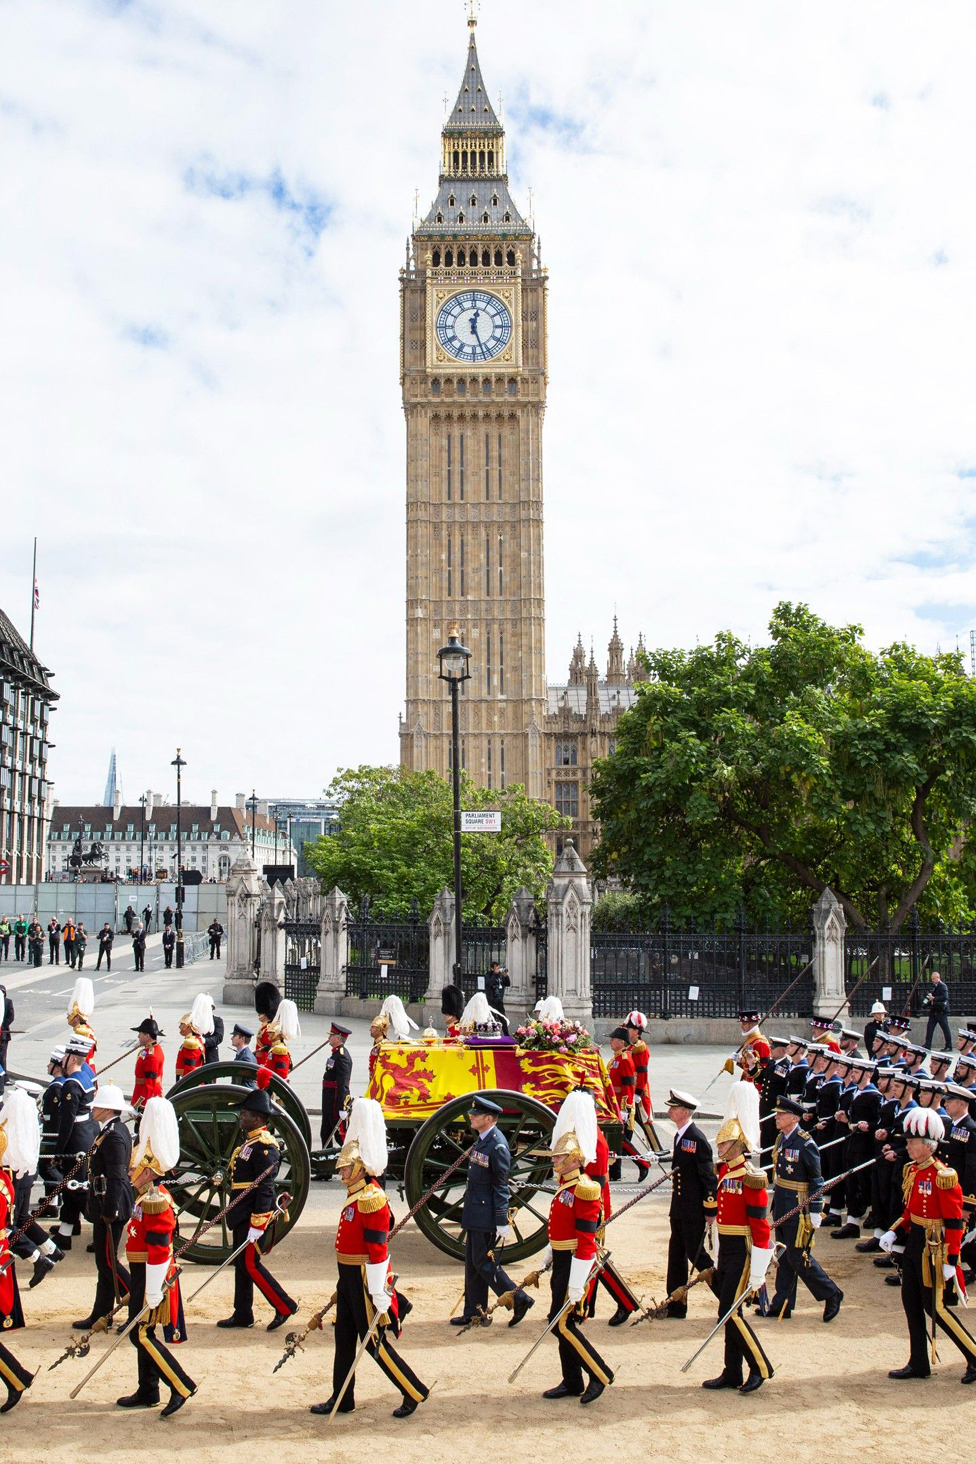 The procession passes the clock tower at the Palace of Westminster.